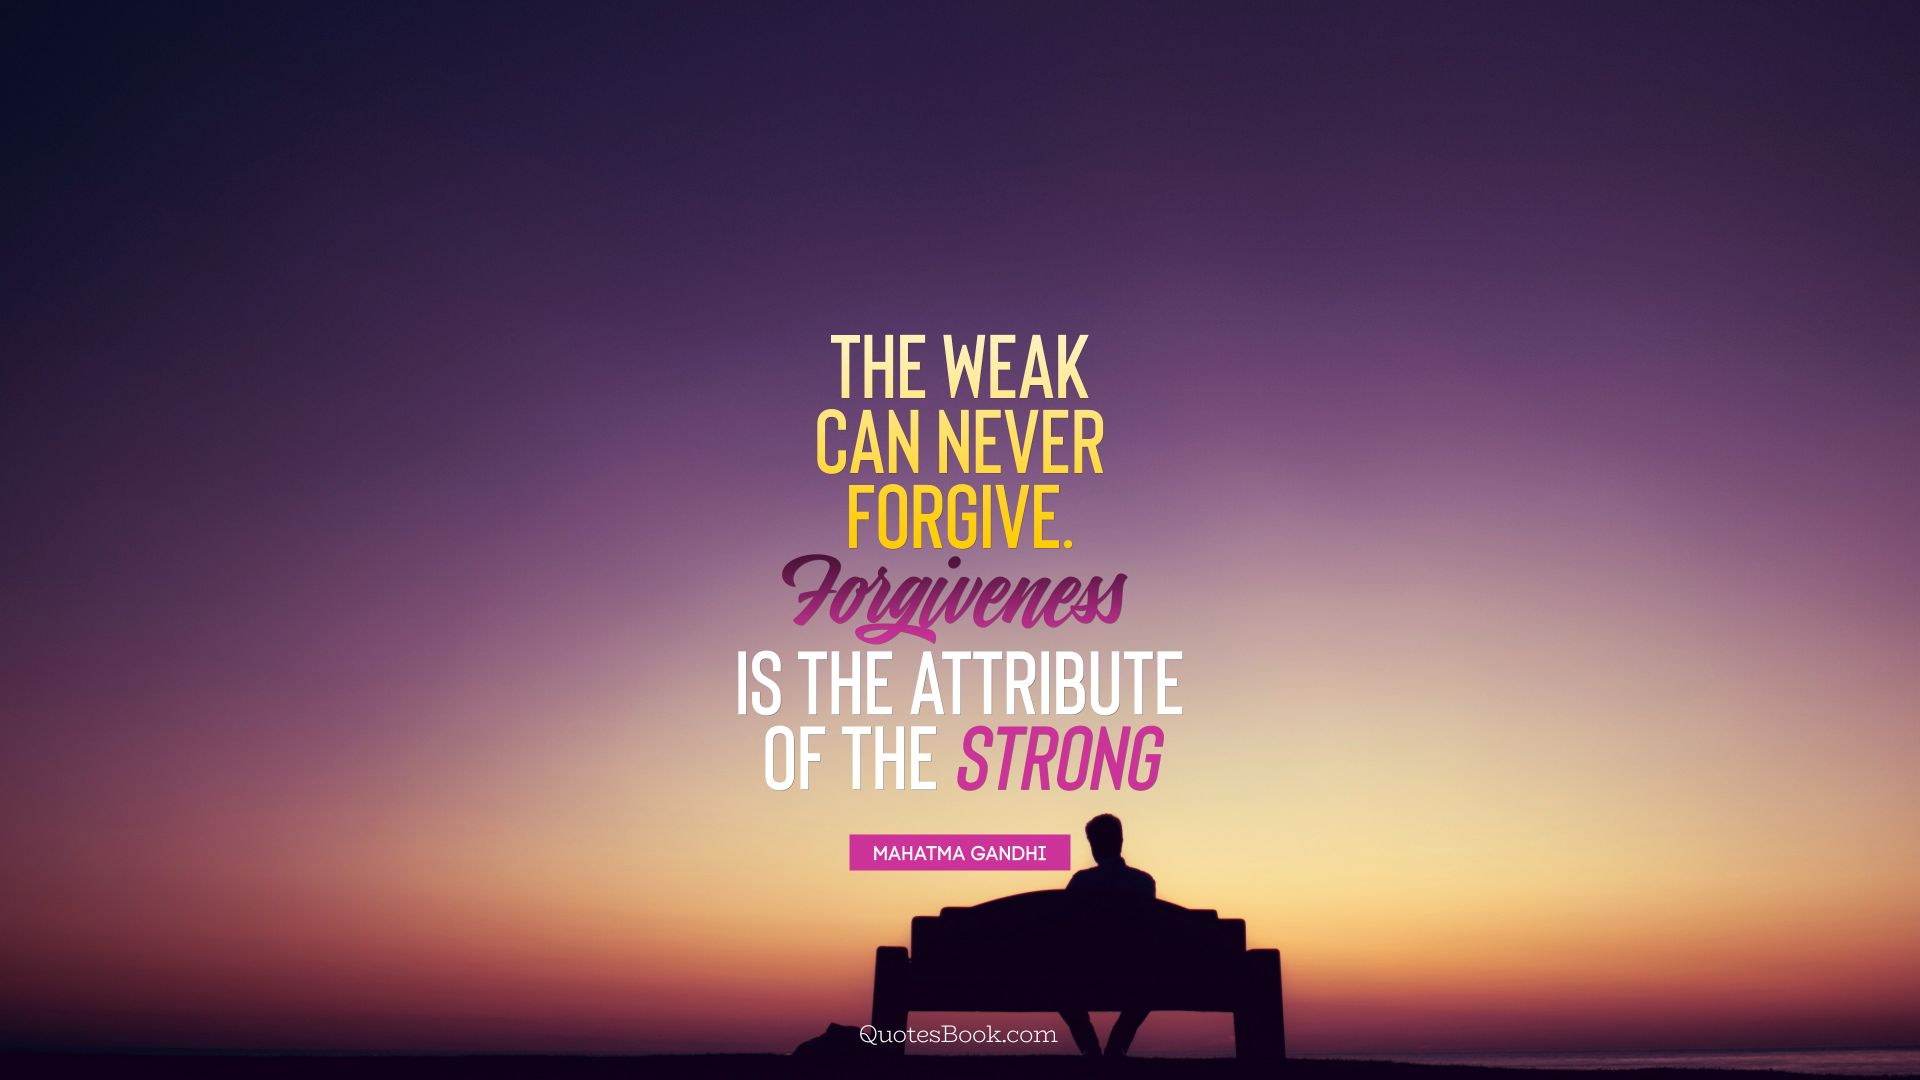 The weak can never forgive. Forgiveness is the attribute of the strong. - Quote by Mahatma Gandhi